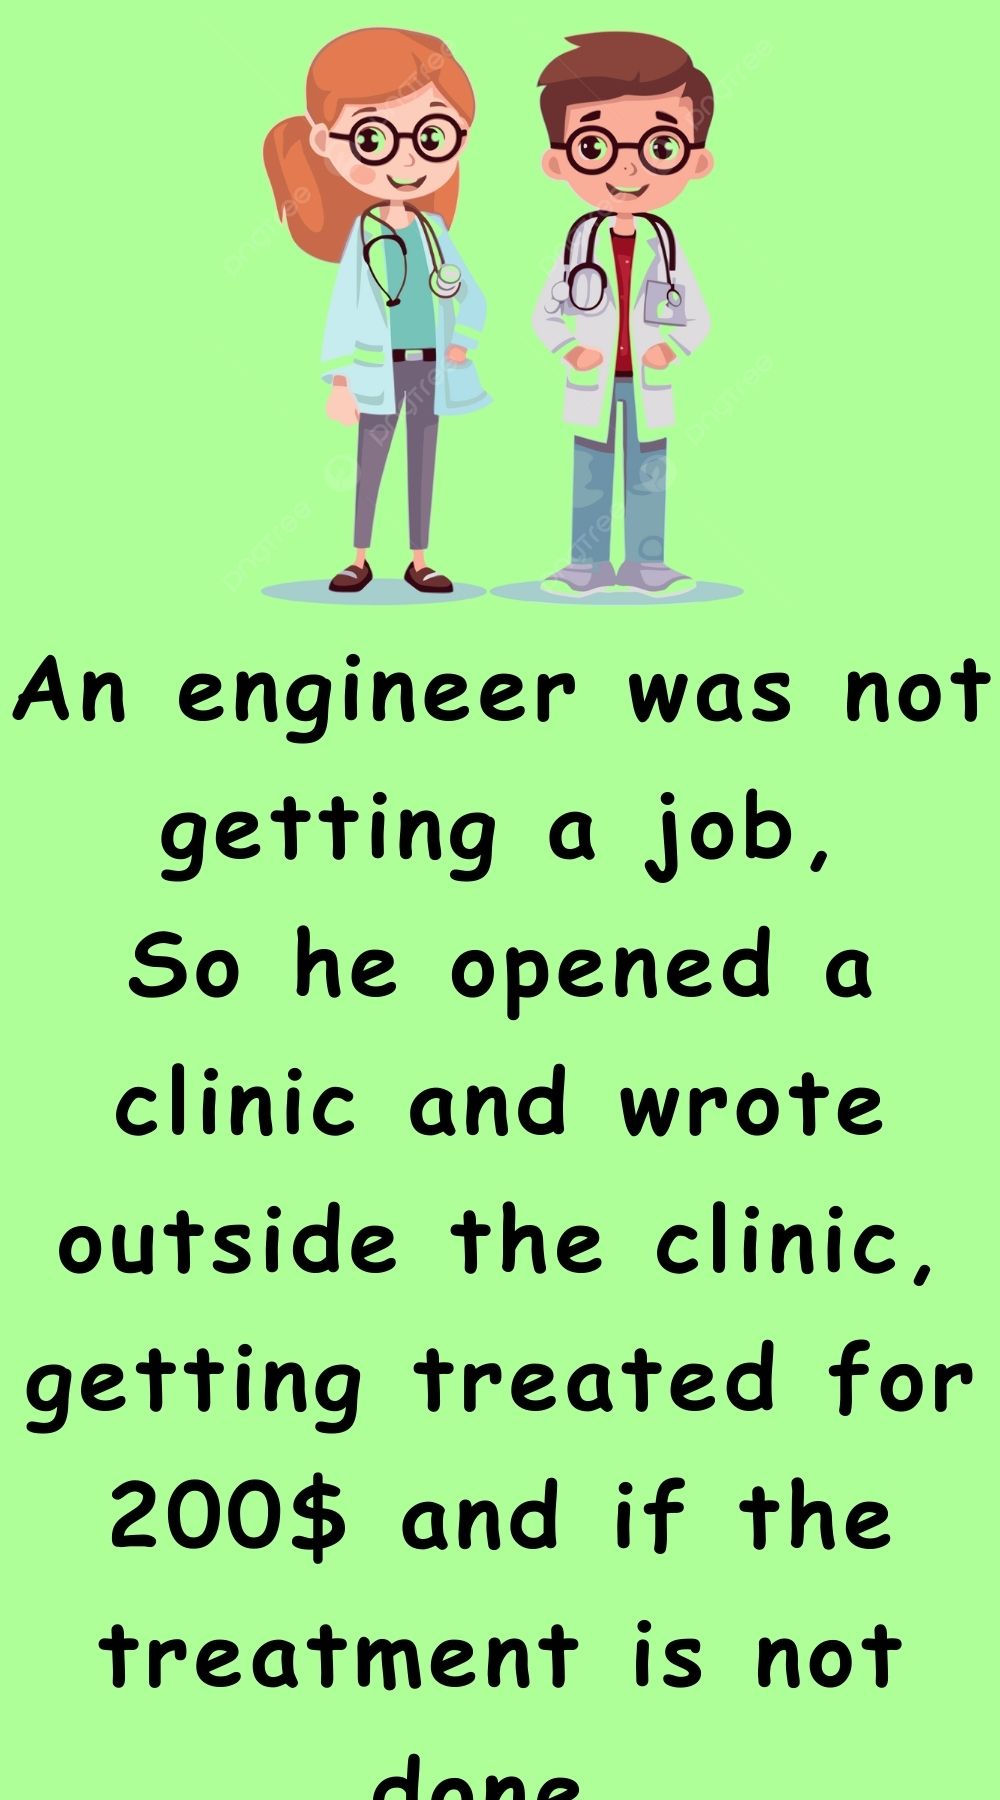 An engineer was not getting a job